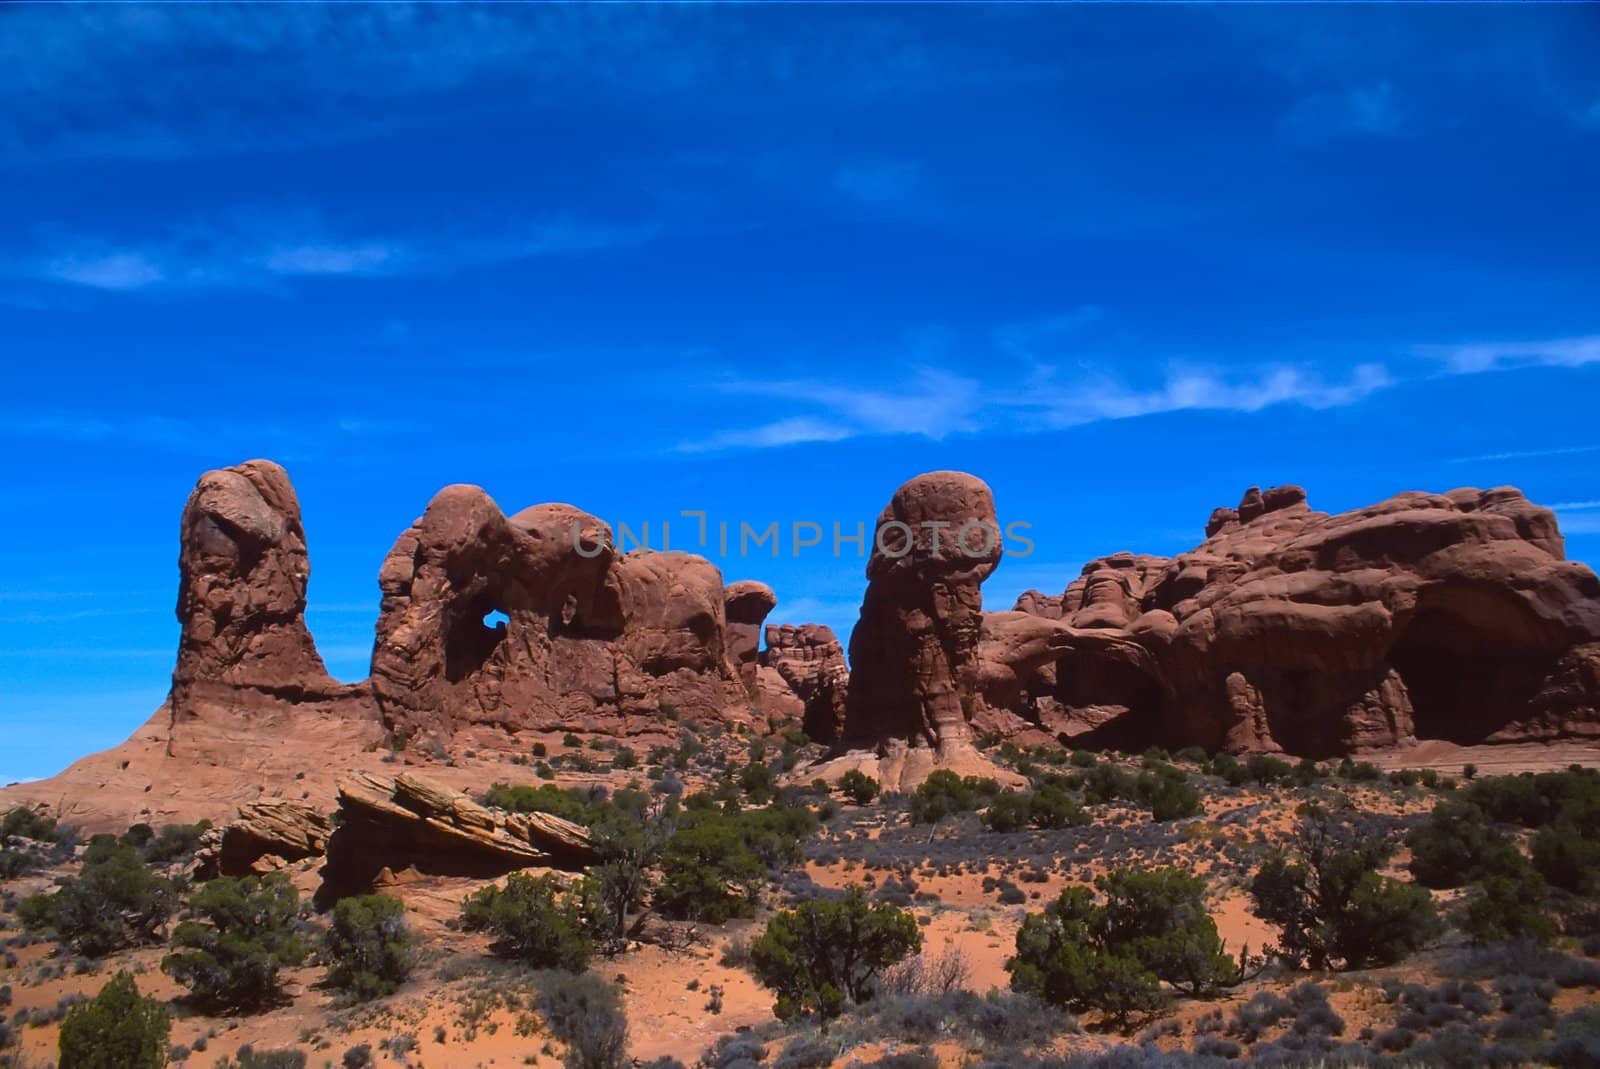 Arches National Park preserves over 2,000 natural sandstone arches, including the world-famous Delicate Arch, in addition to a variety of unique geological resources and formations.